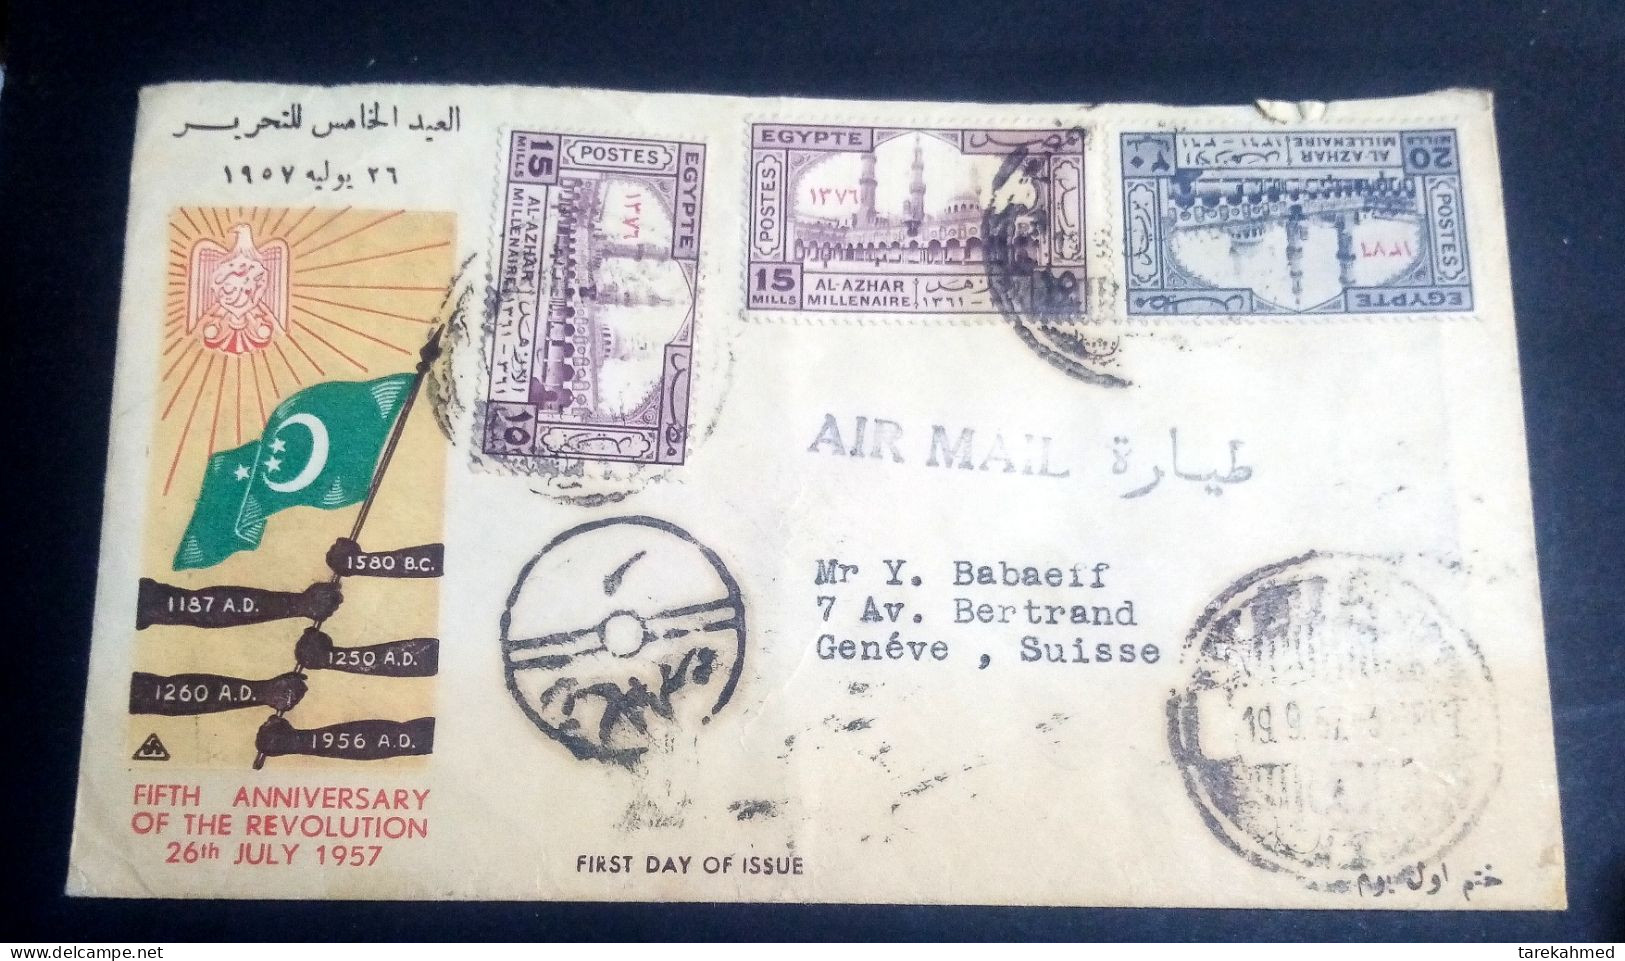 Egypt 1957, Rare FDC Of The 5th Anniv. Of The Revolution Sent To Swiss, 1000th Anniv, Of Al-Azhar University Stamps , VF - Covers & Documents